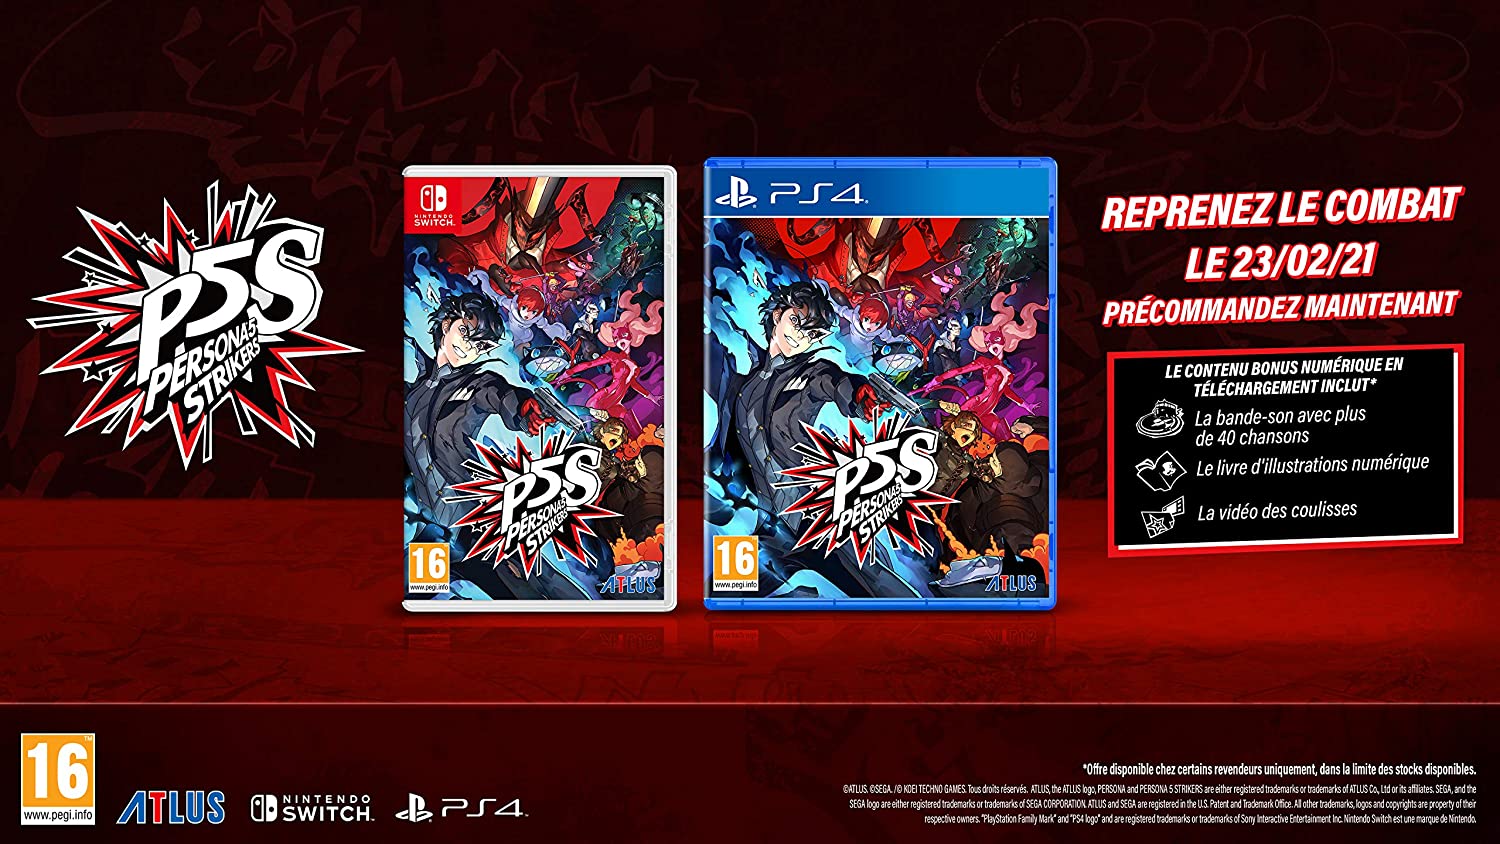 Persona 5 Strikers Launch Edition